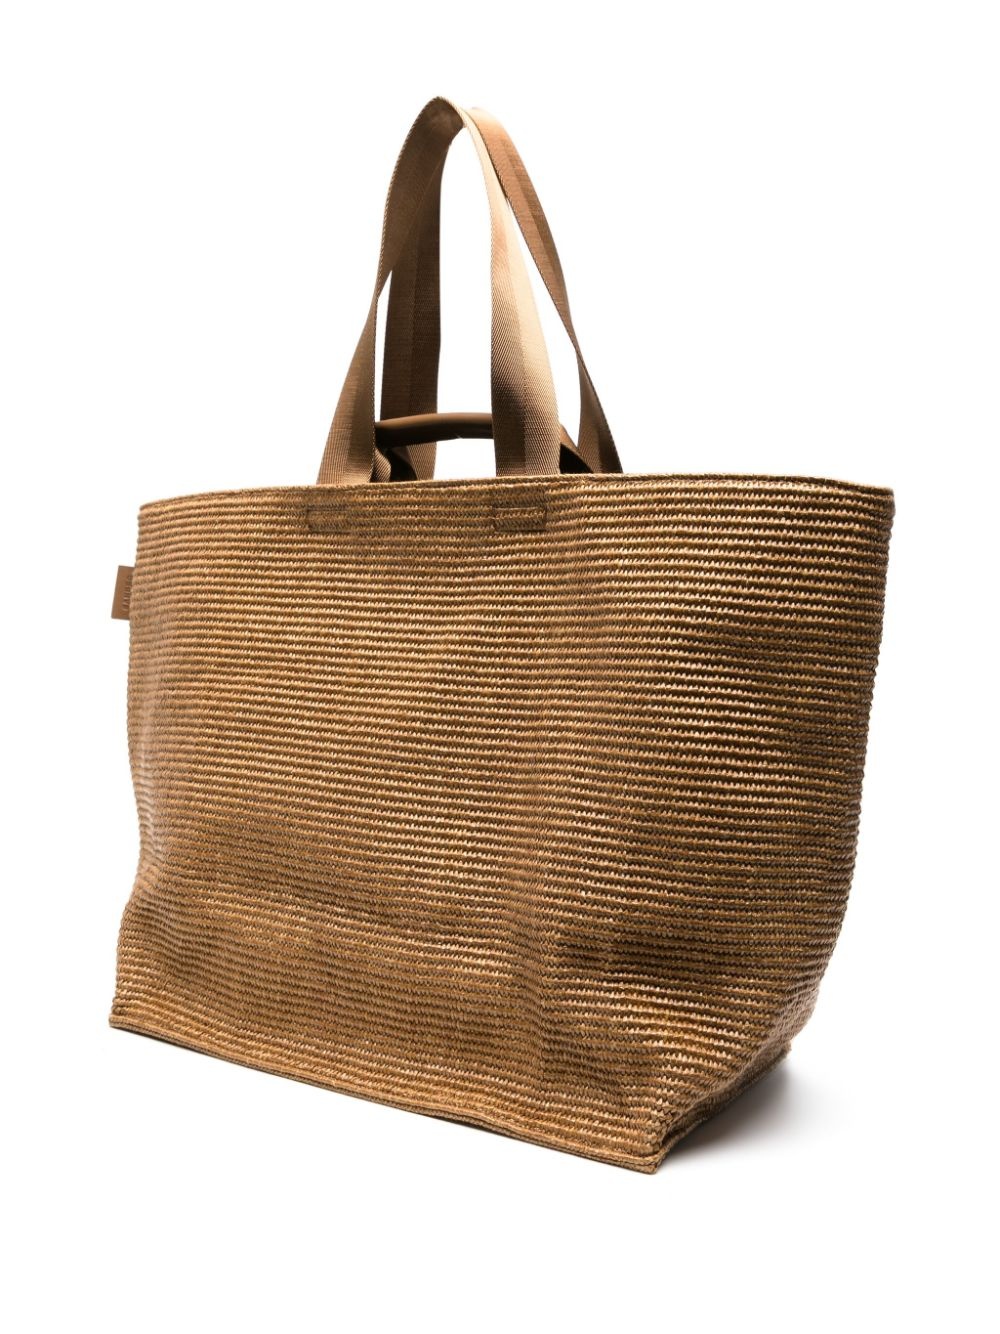 woven straw tote bag - 3